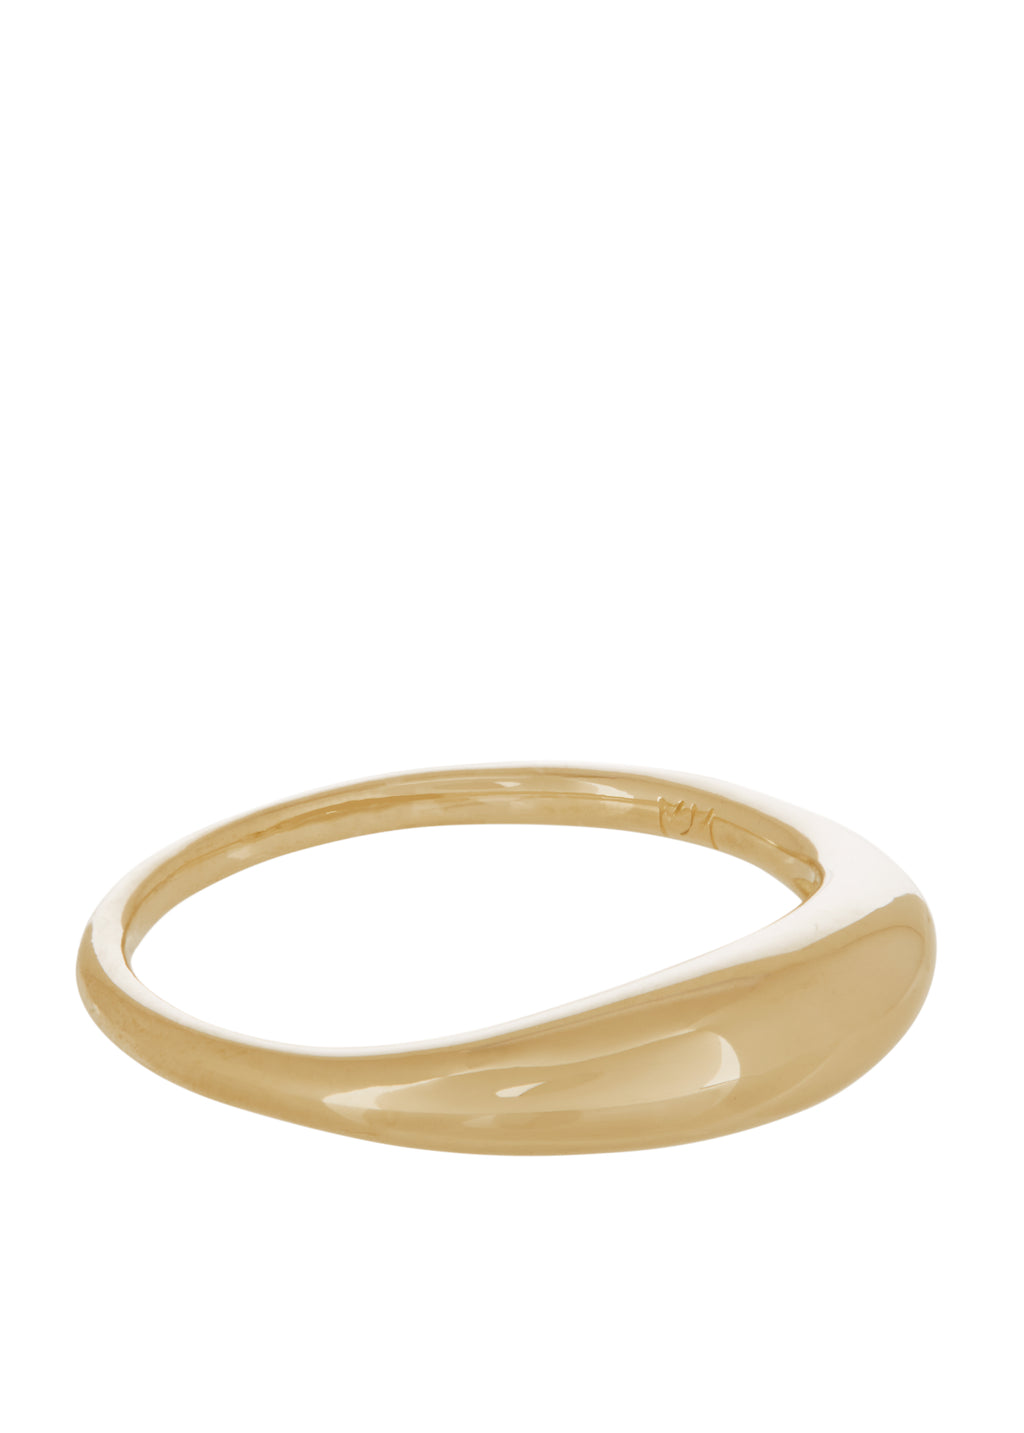 WE ALSO BUY LOWER GRADE GOLD RING! | JEWEL CAFÉ Malaysia